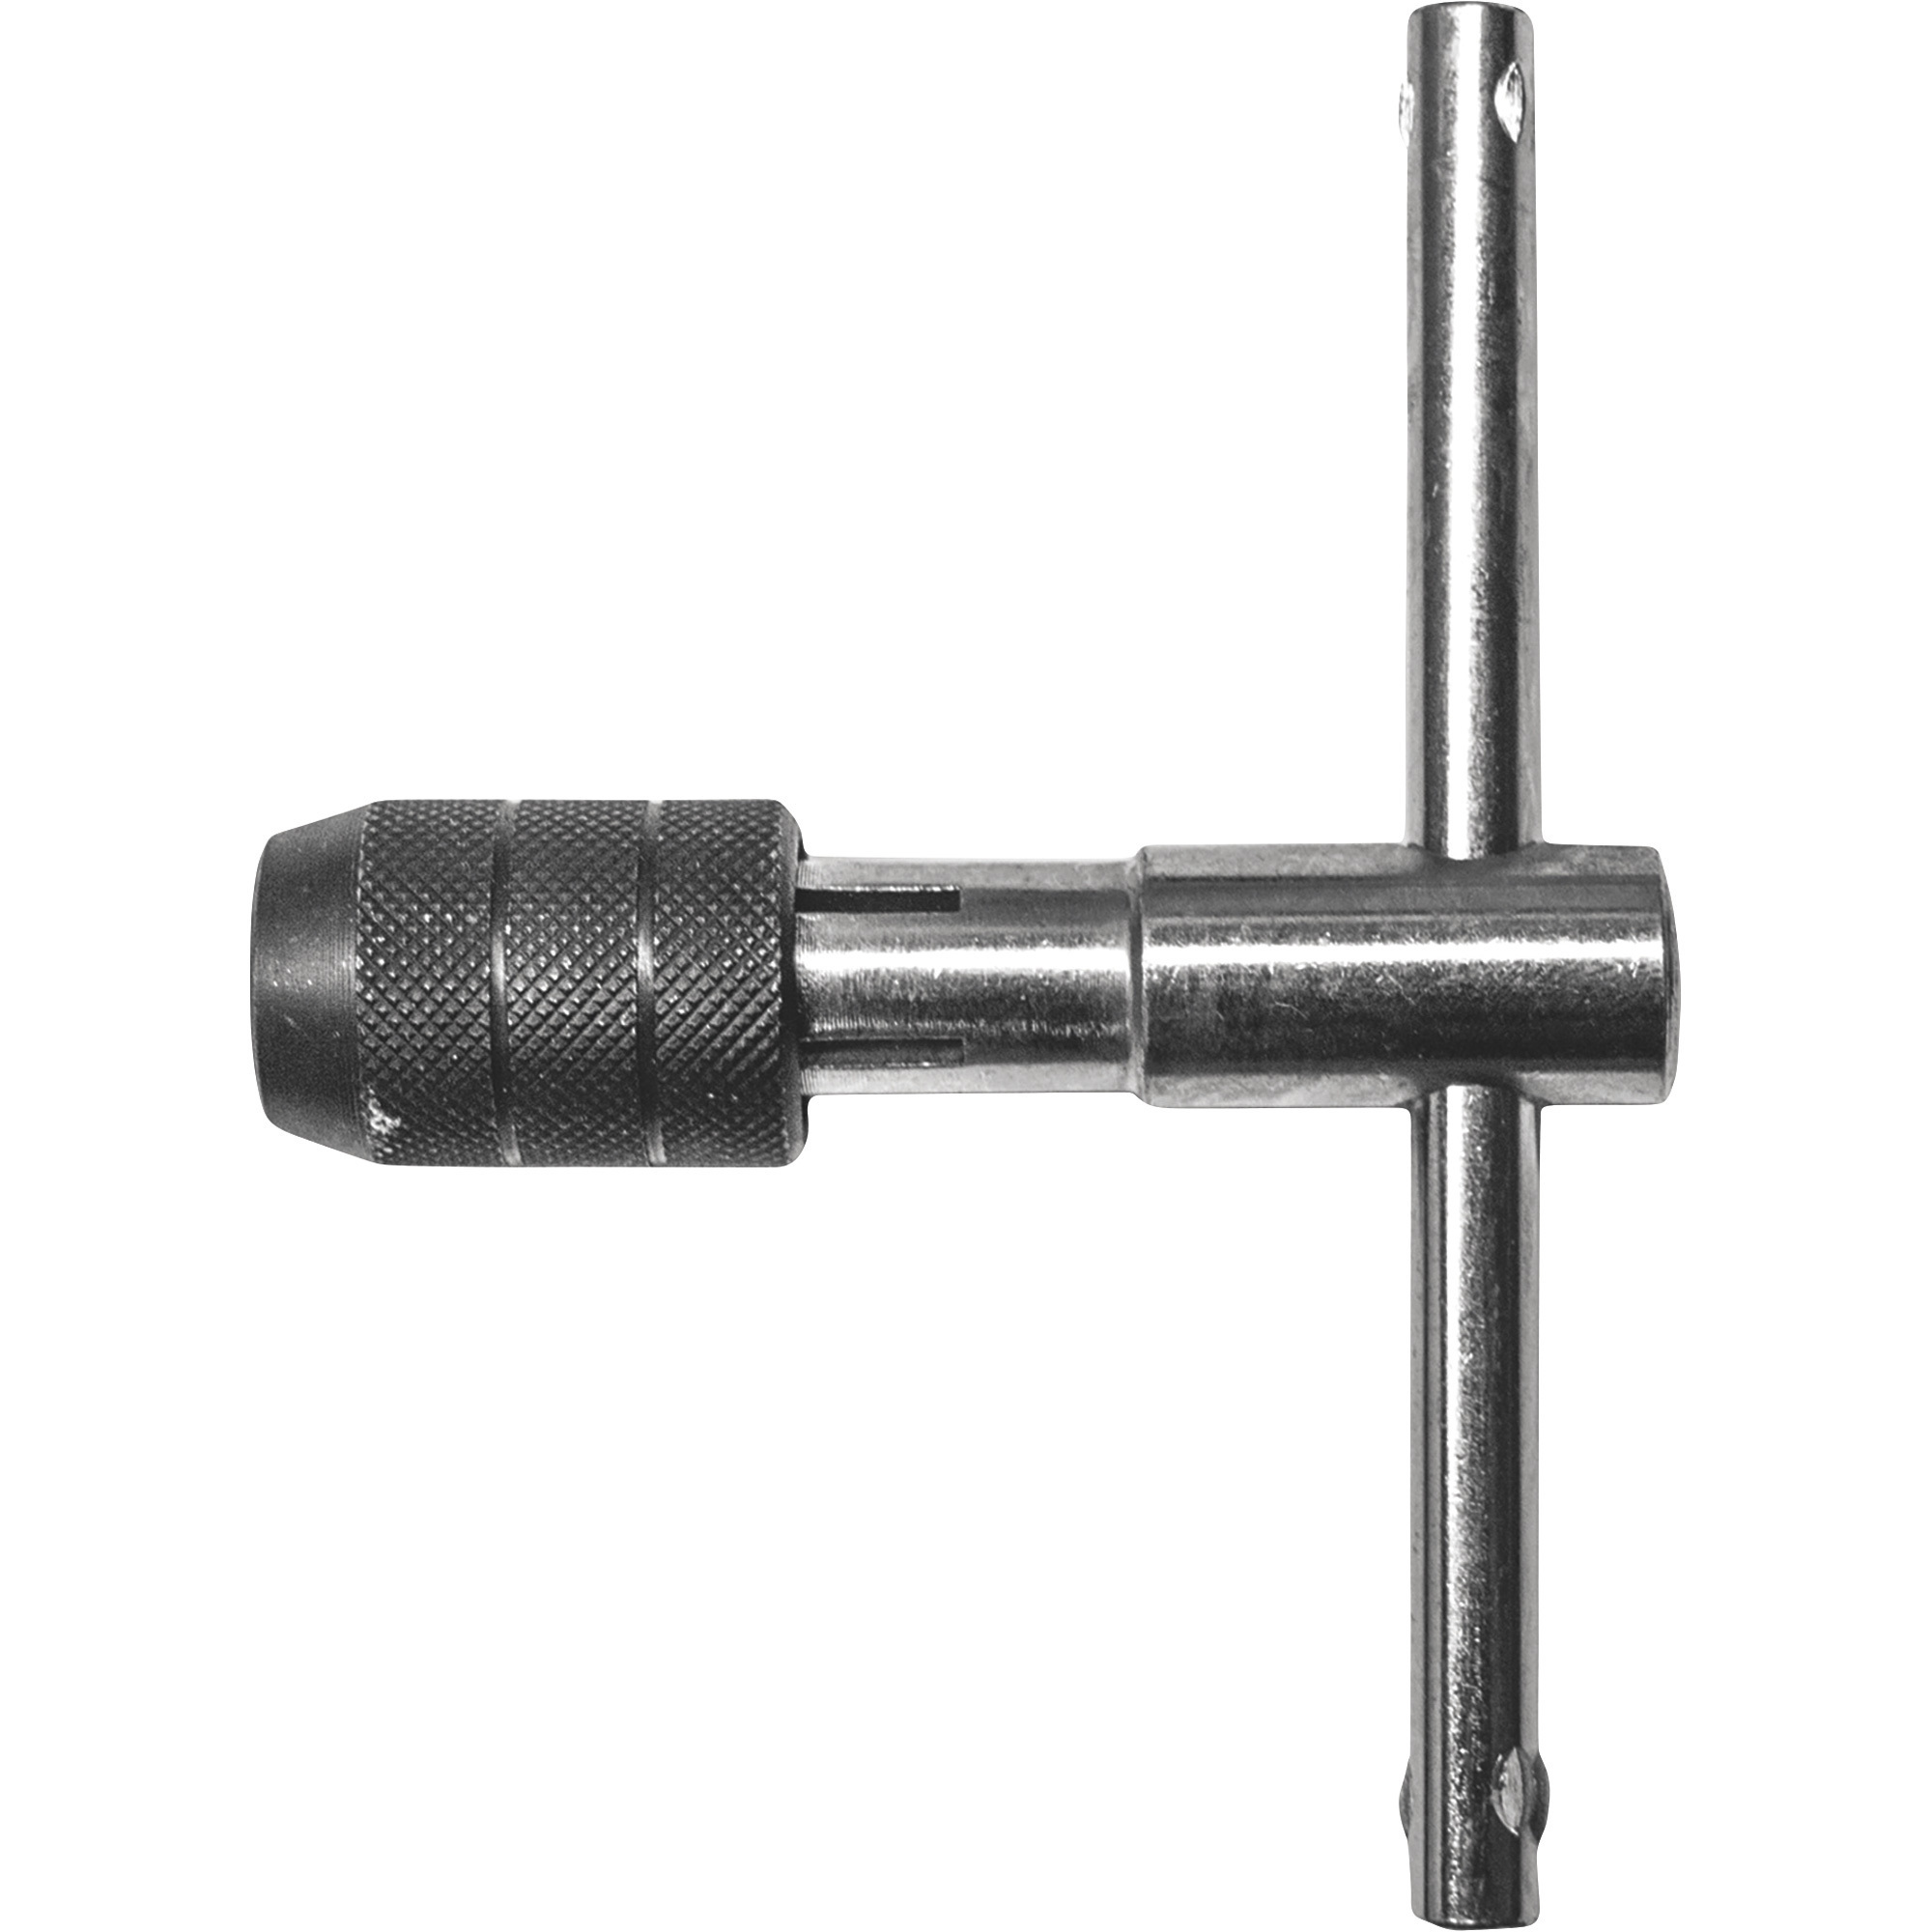 Century Drill & Tool T-Handle Tap Wrench, 1/4-1/2Inch, Model 98502